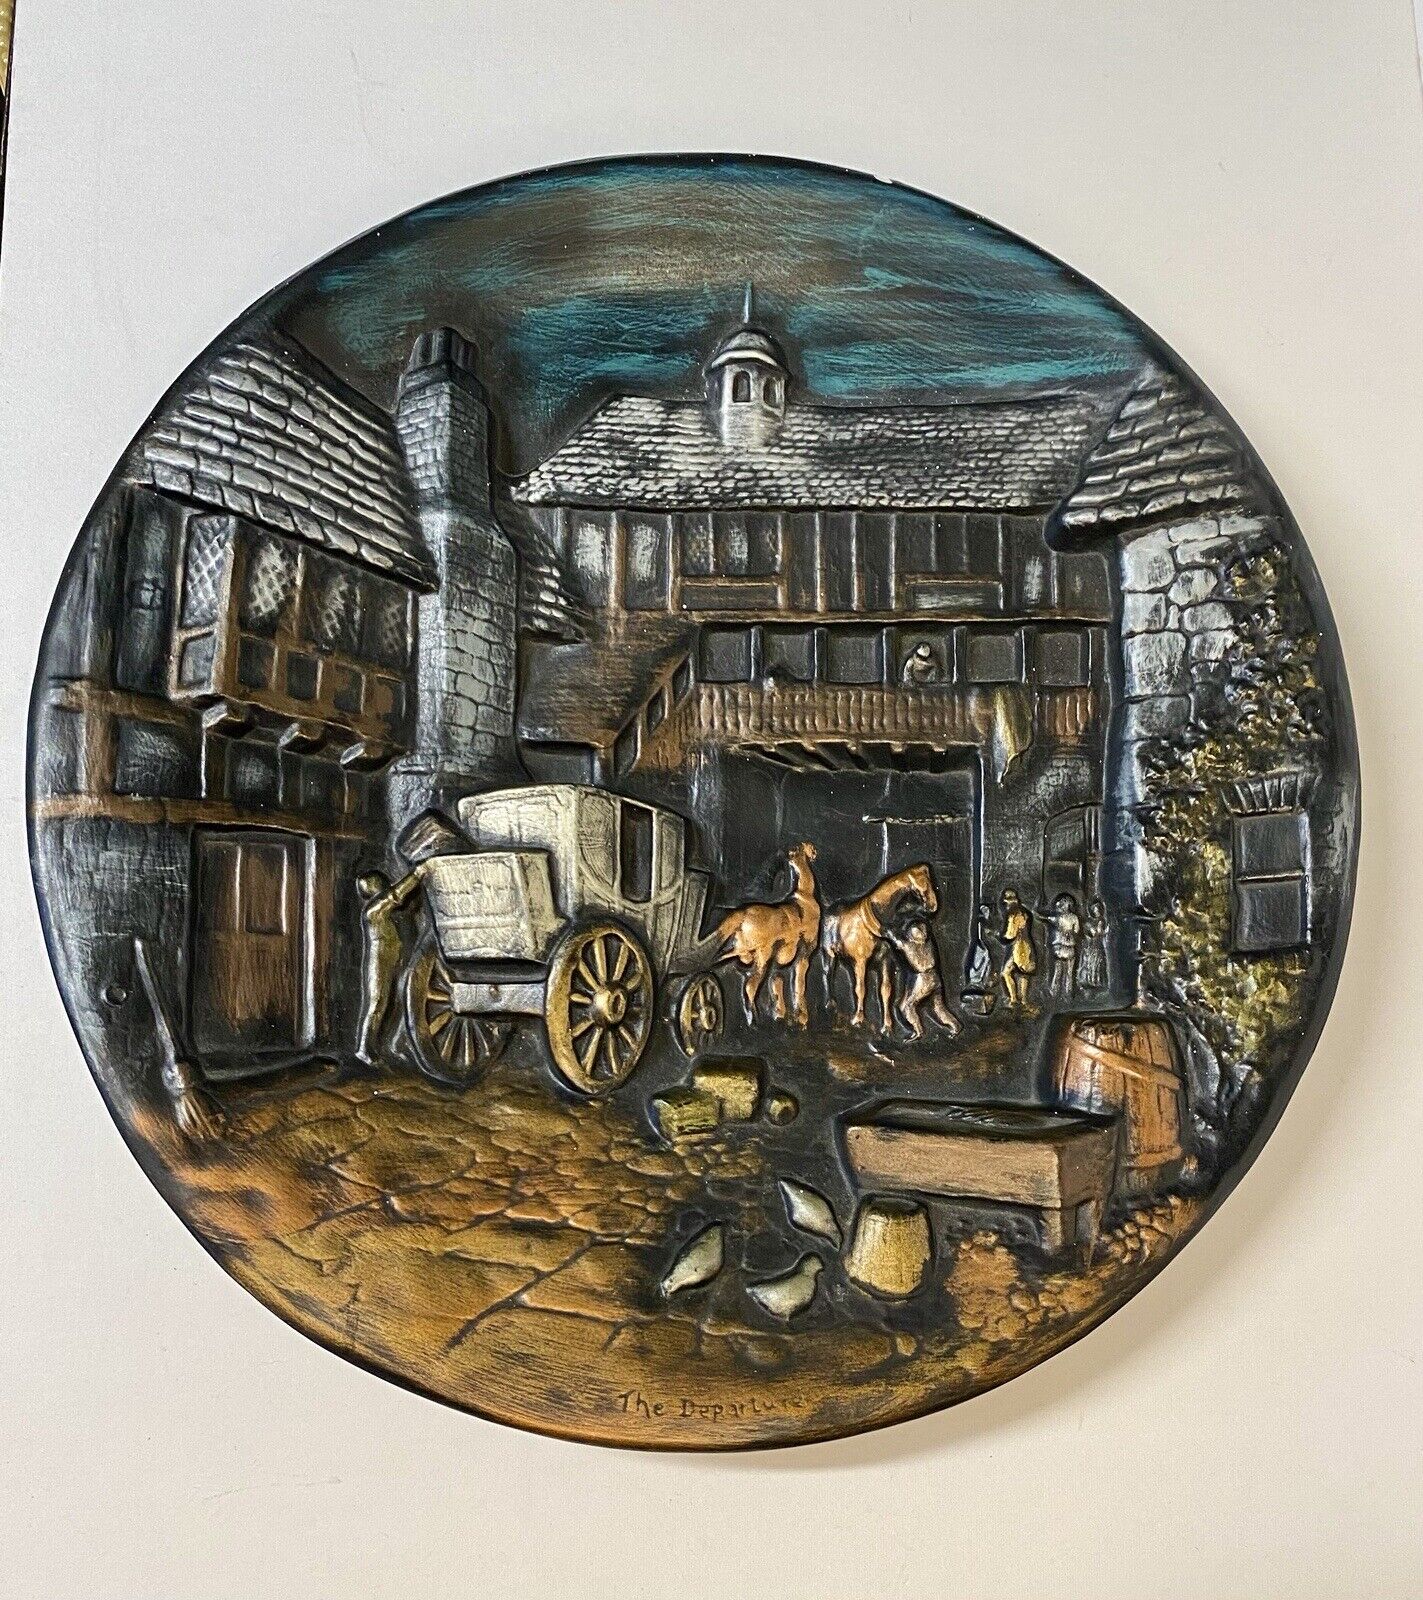 Vintage 14.0” Plate “The Departure” Horse & Buggy Hand Crafted & Painted 3 D